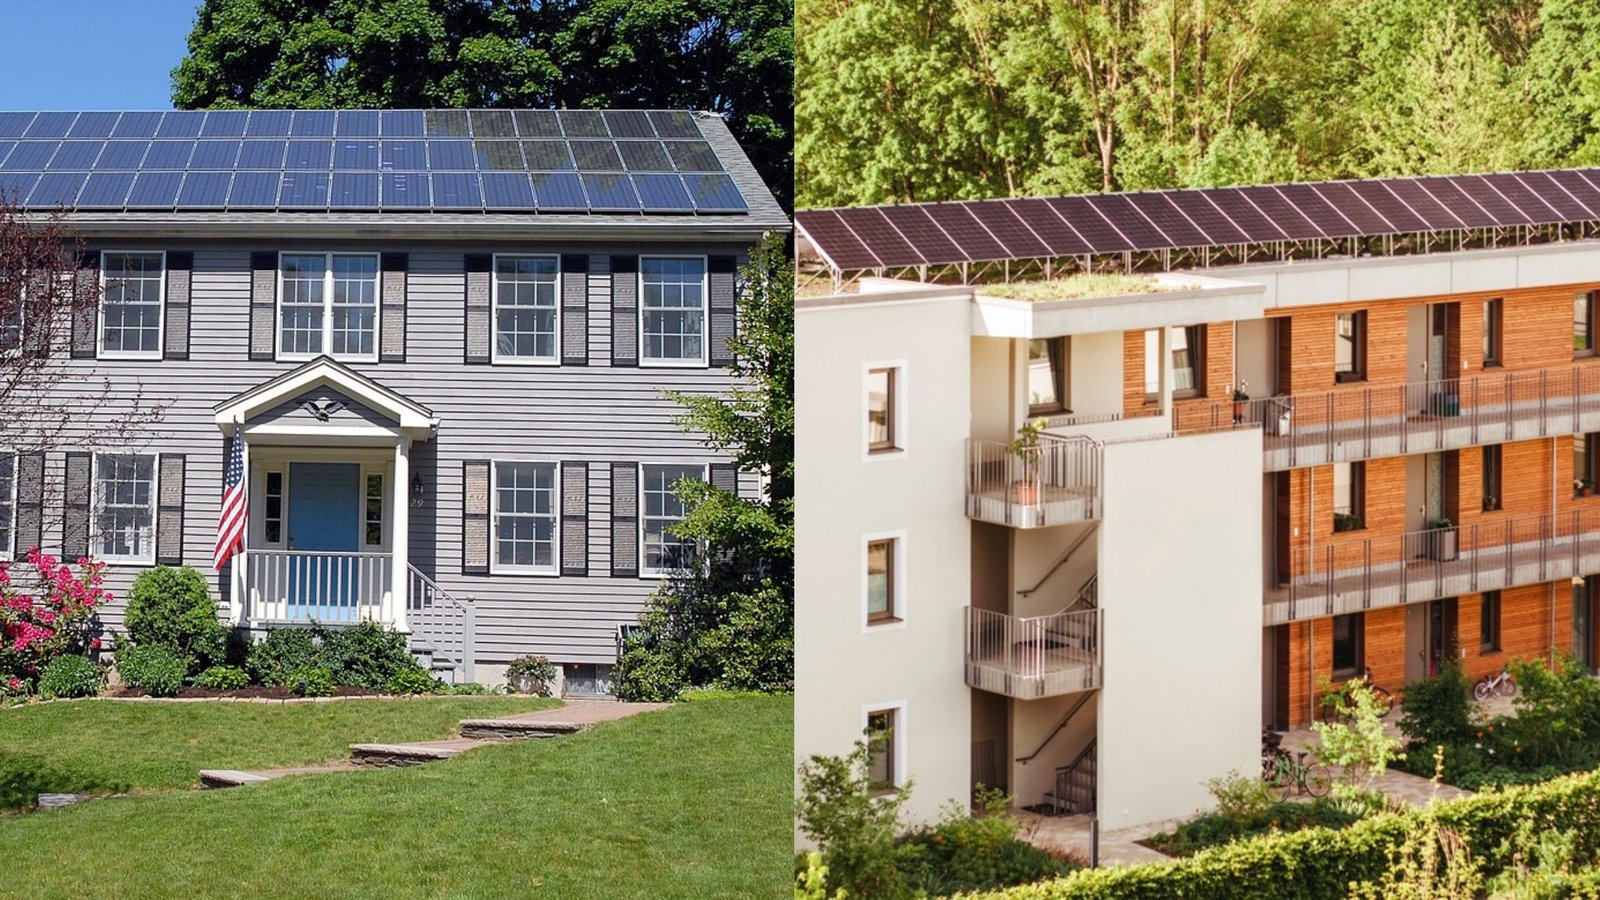 solar panels on roof of different home types